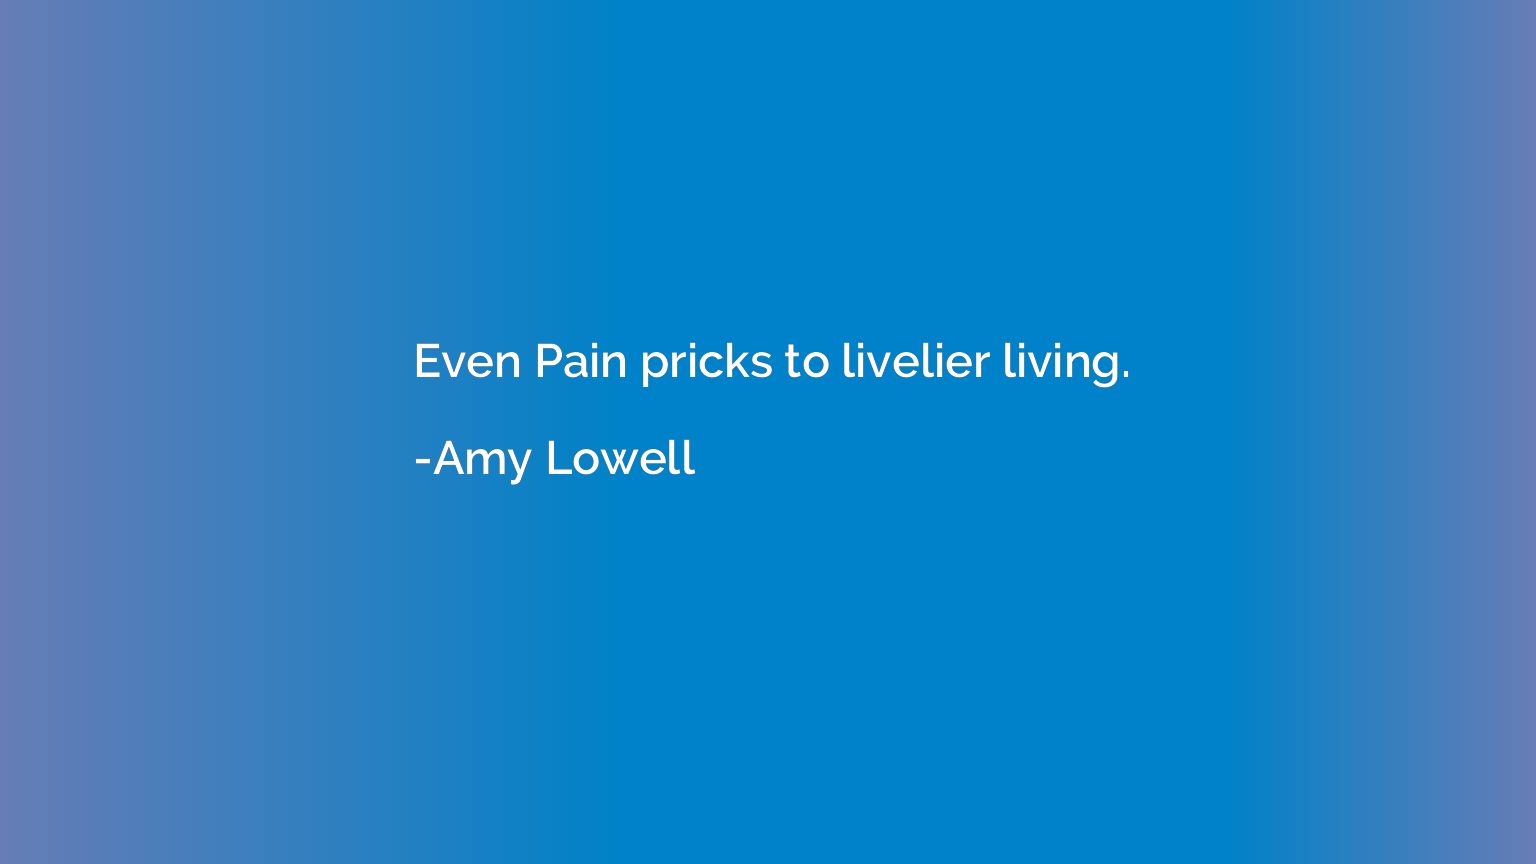 Even Pain pricks to livelier living.